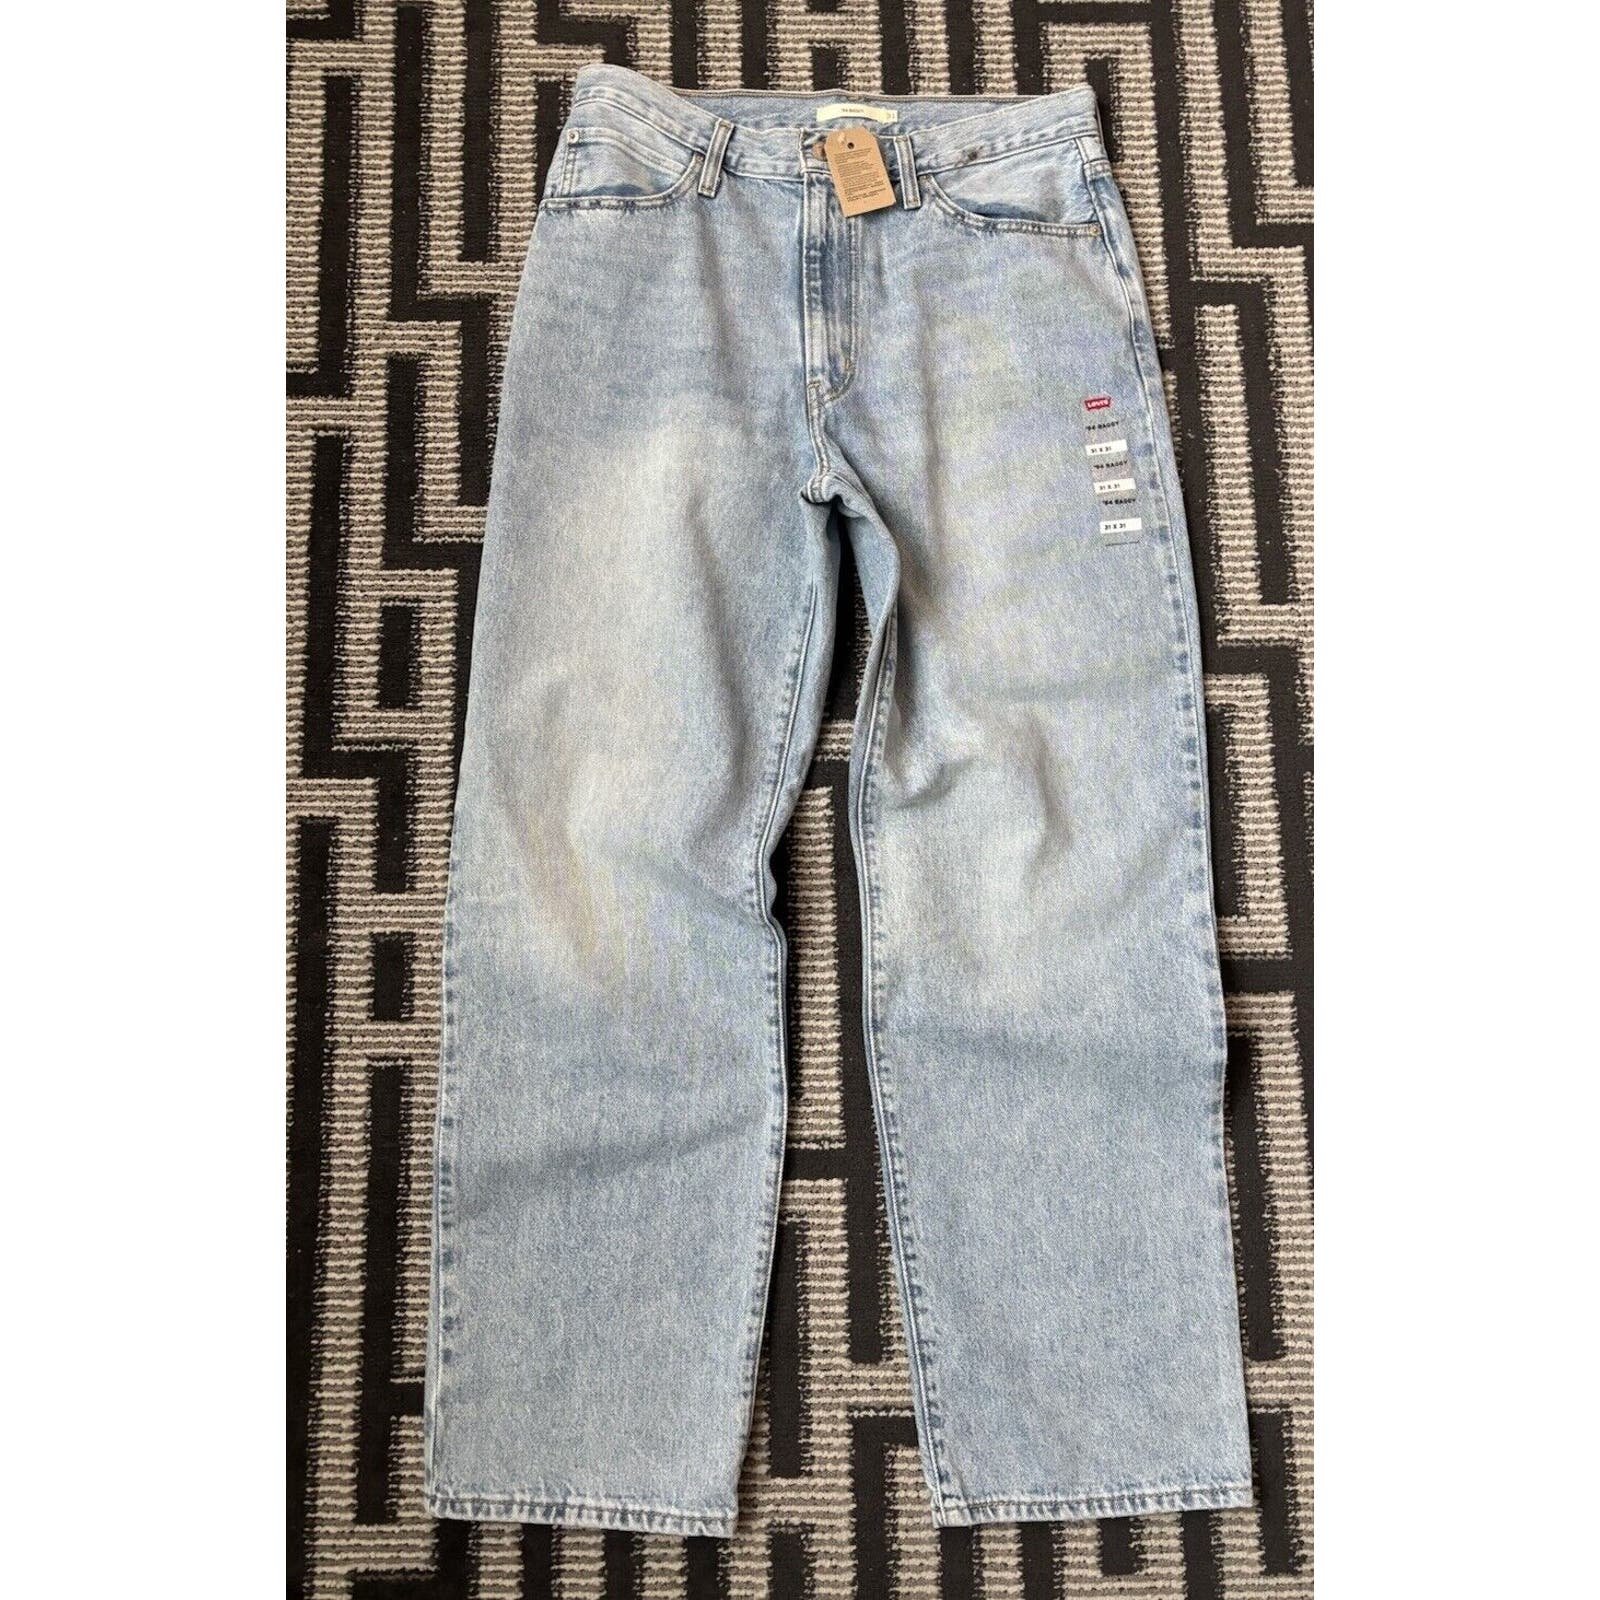 large discount Levi´s Women´s ´94 Baggy Jeans Size 31 New NWT Straight Leg High Rise 31x31 pGplfWPQo US Sale